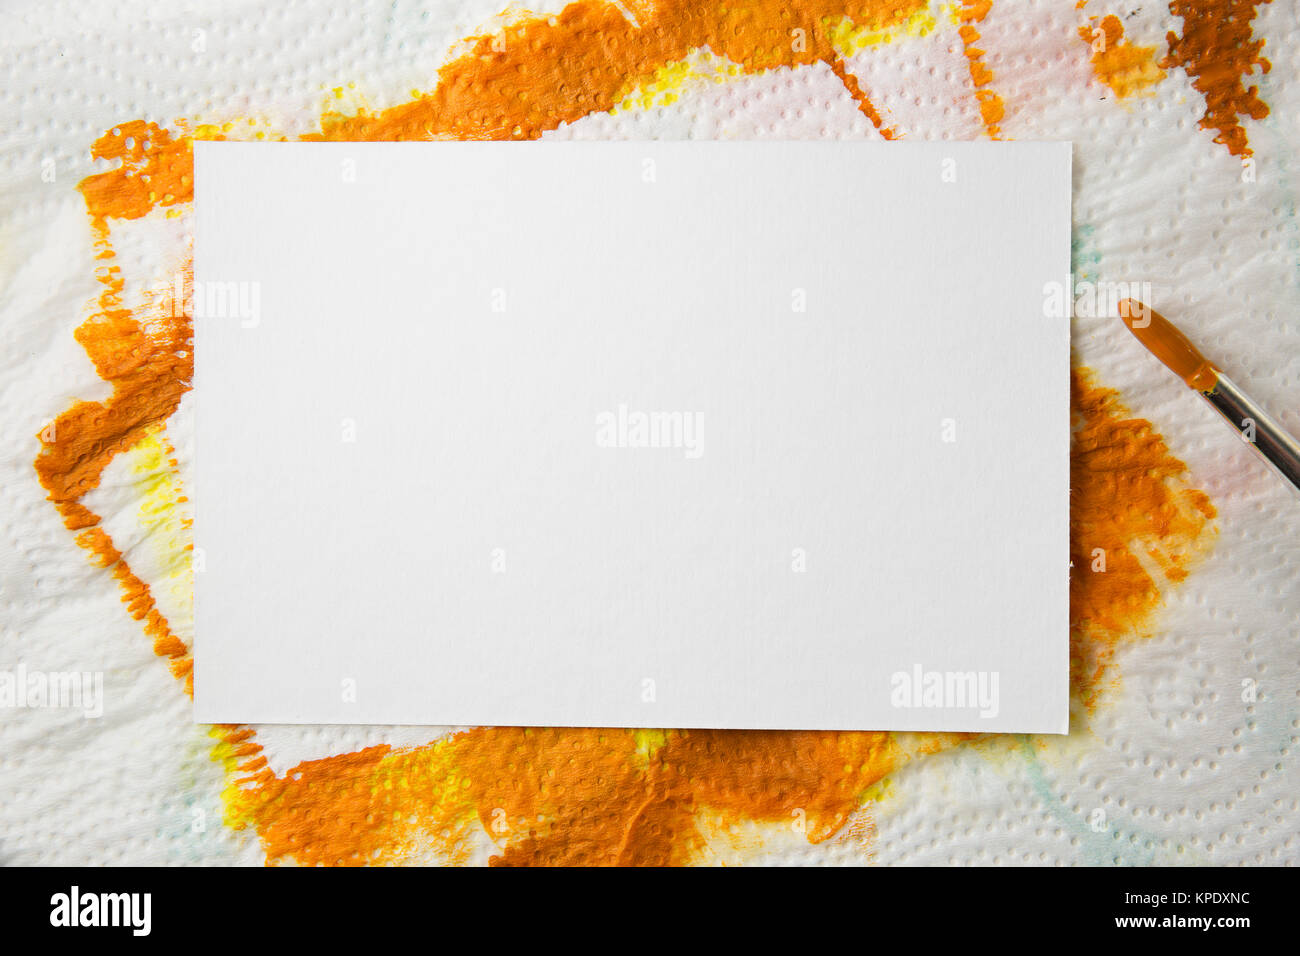 White Paper Frame for Painting Stock Photo